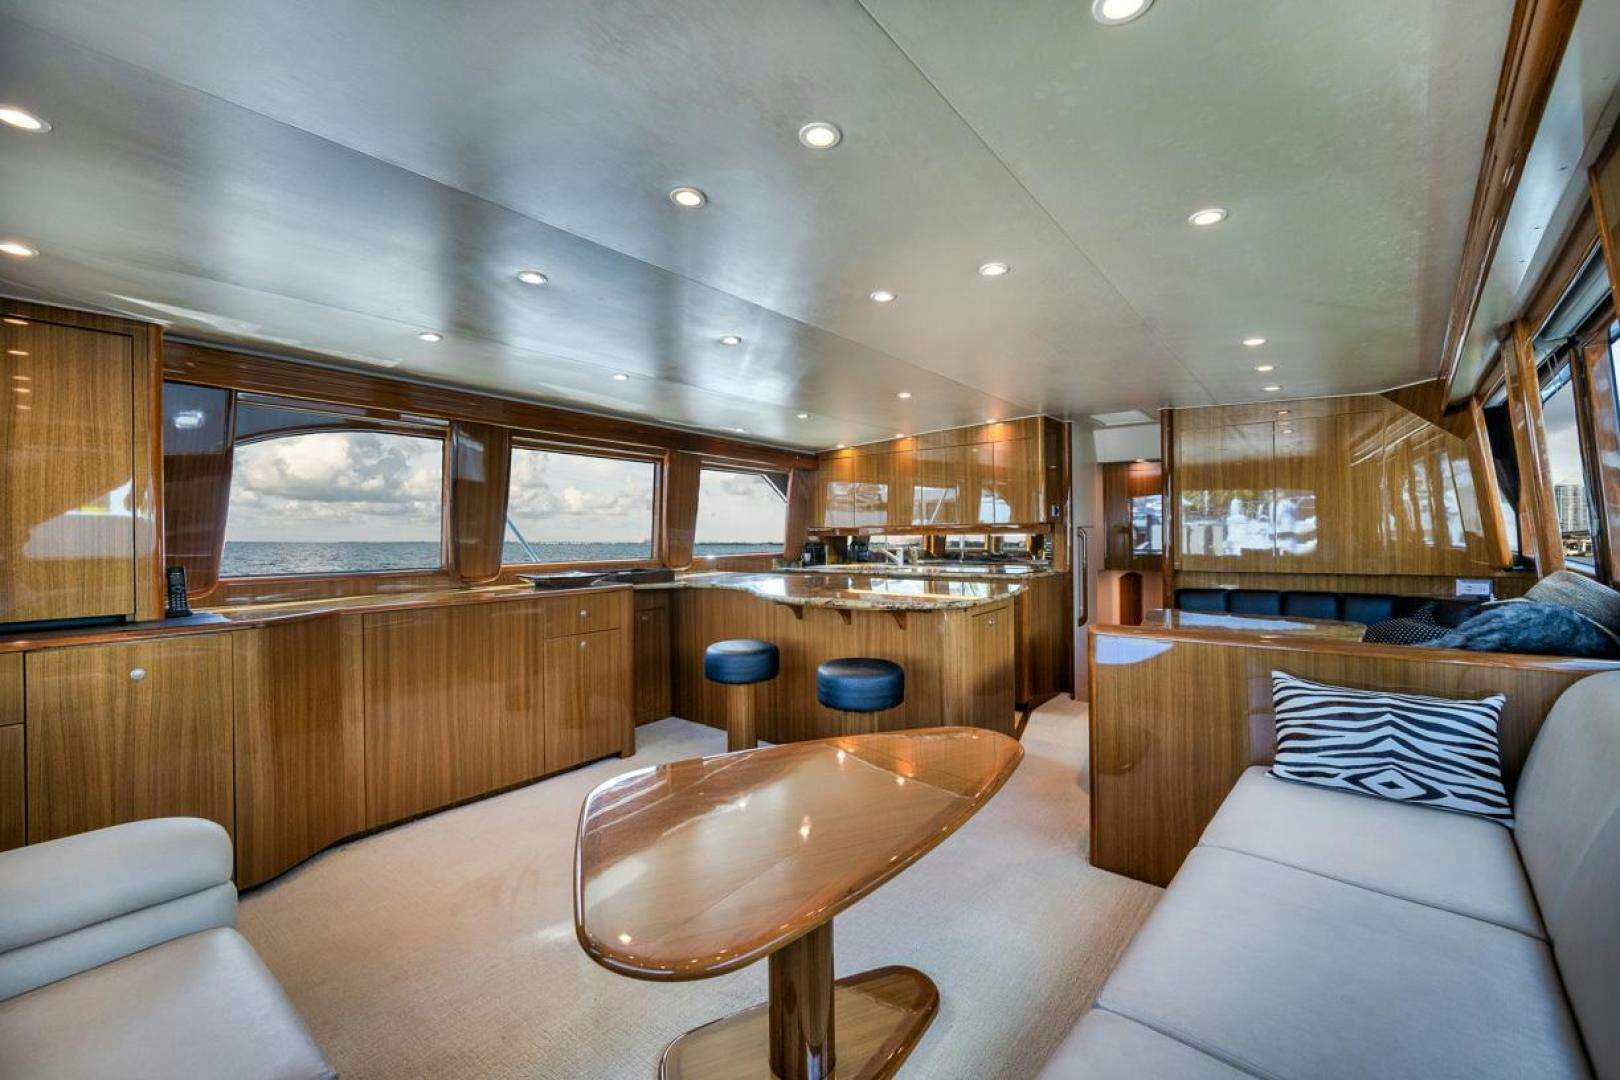 68 viking
Yacht for Sale